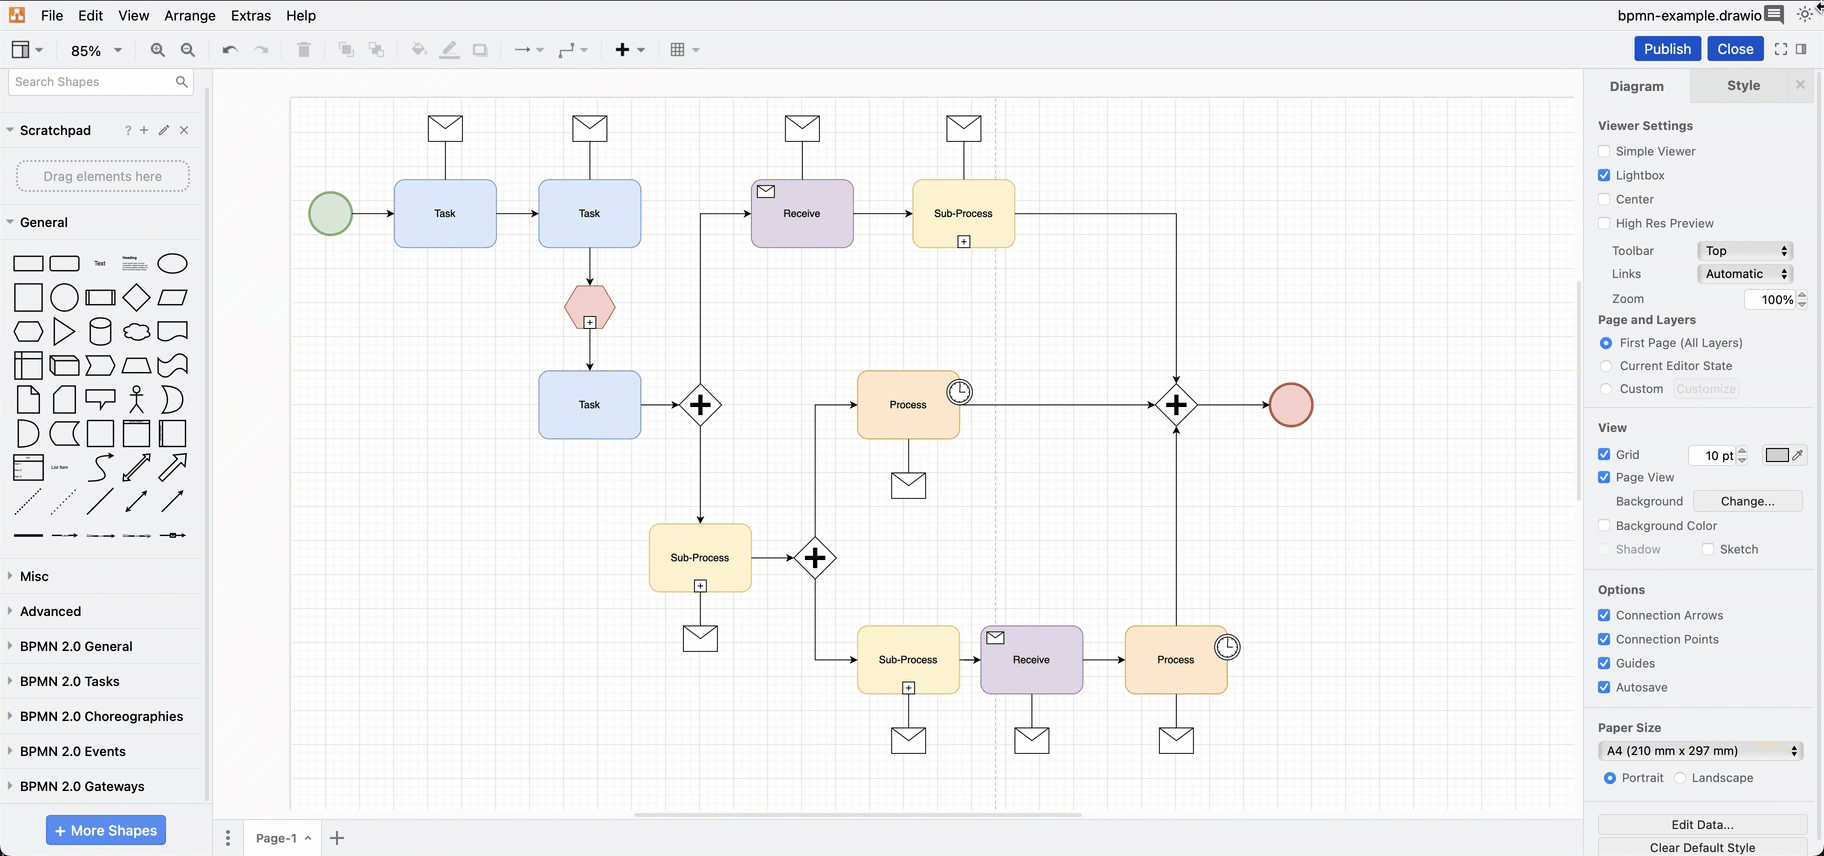 draw.io users in Confluence can use light or dark mode when collaborating on the same diagram